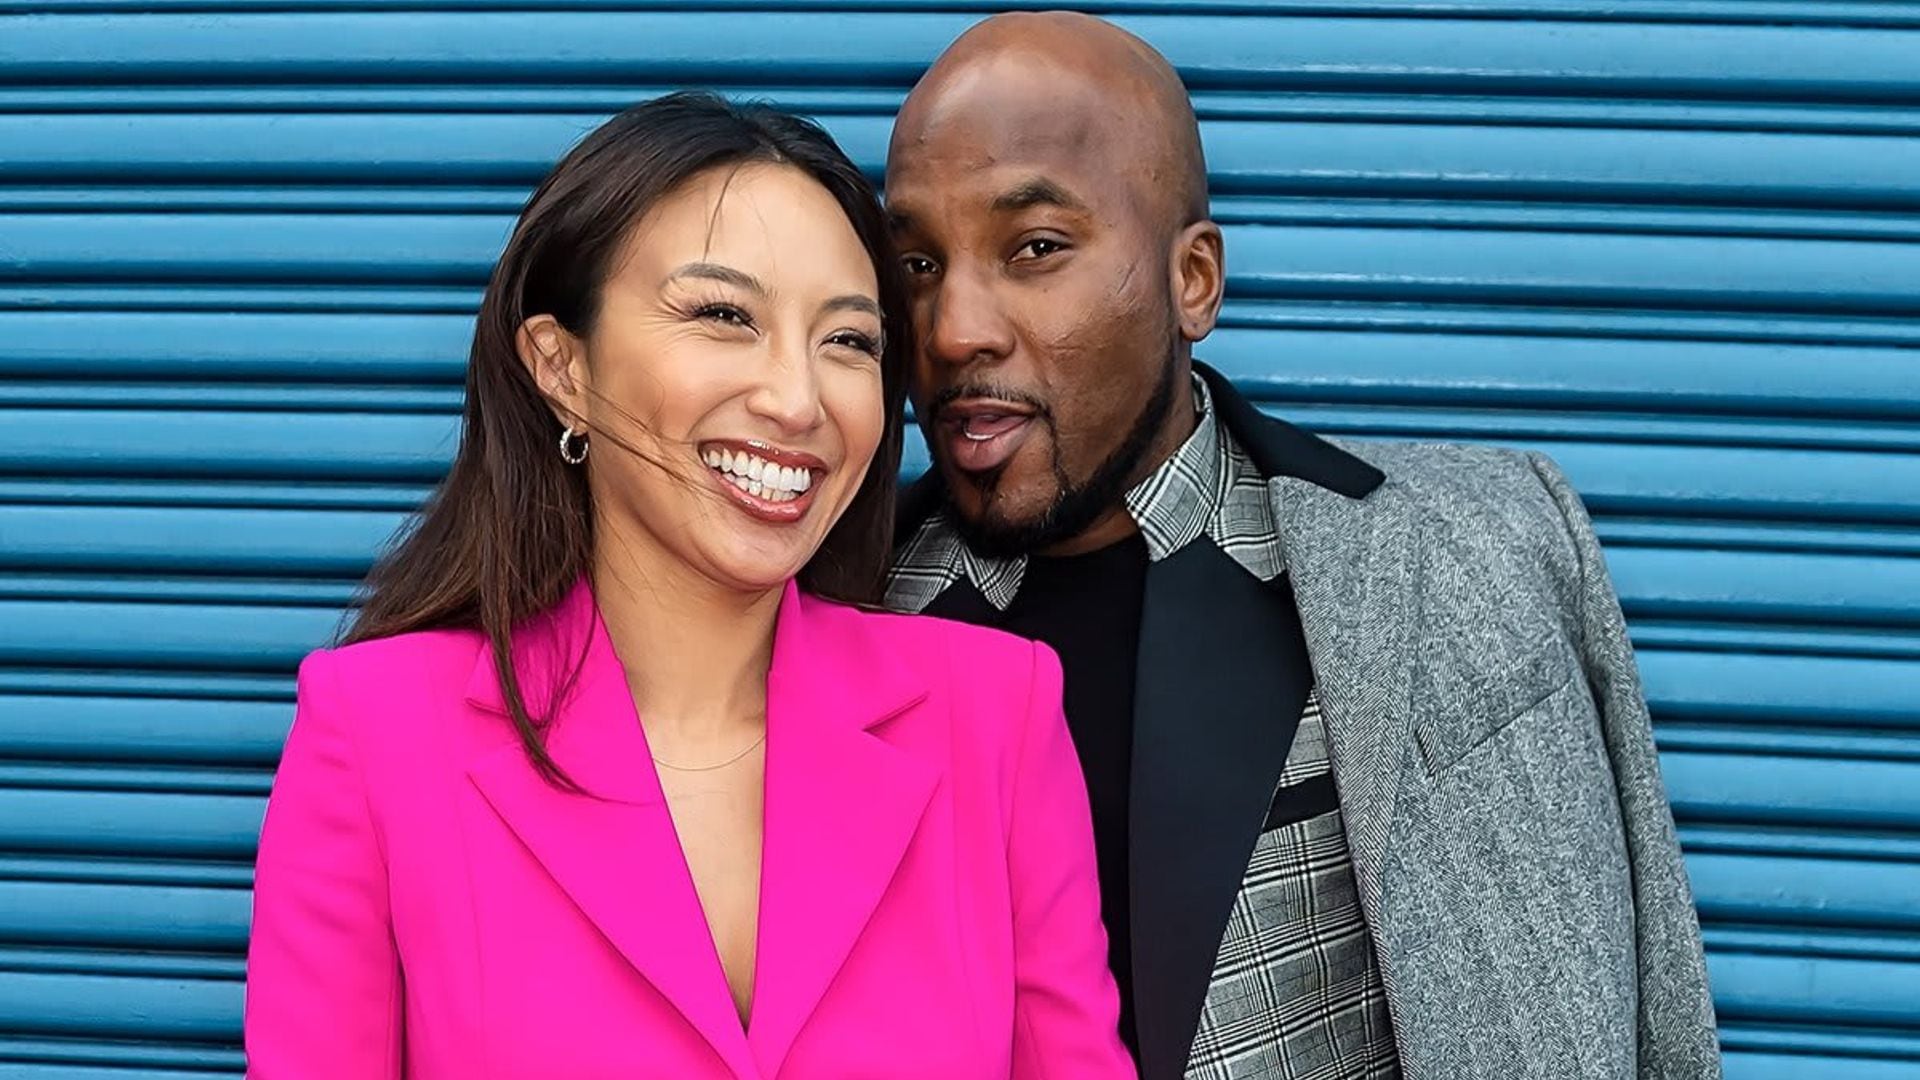 Jeannie Mai and Jeezy tie the knot in an intimate ceremony at this surprise location